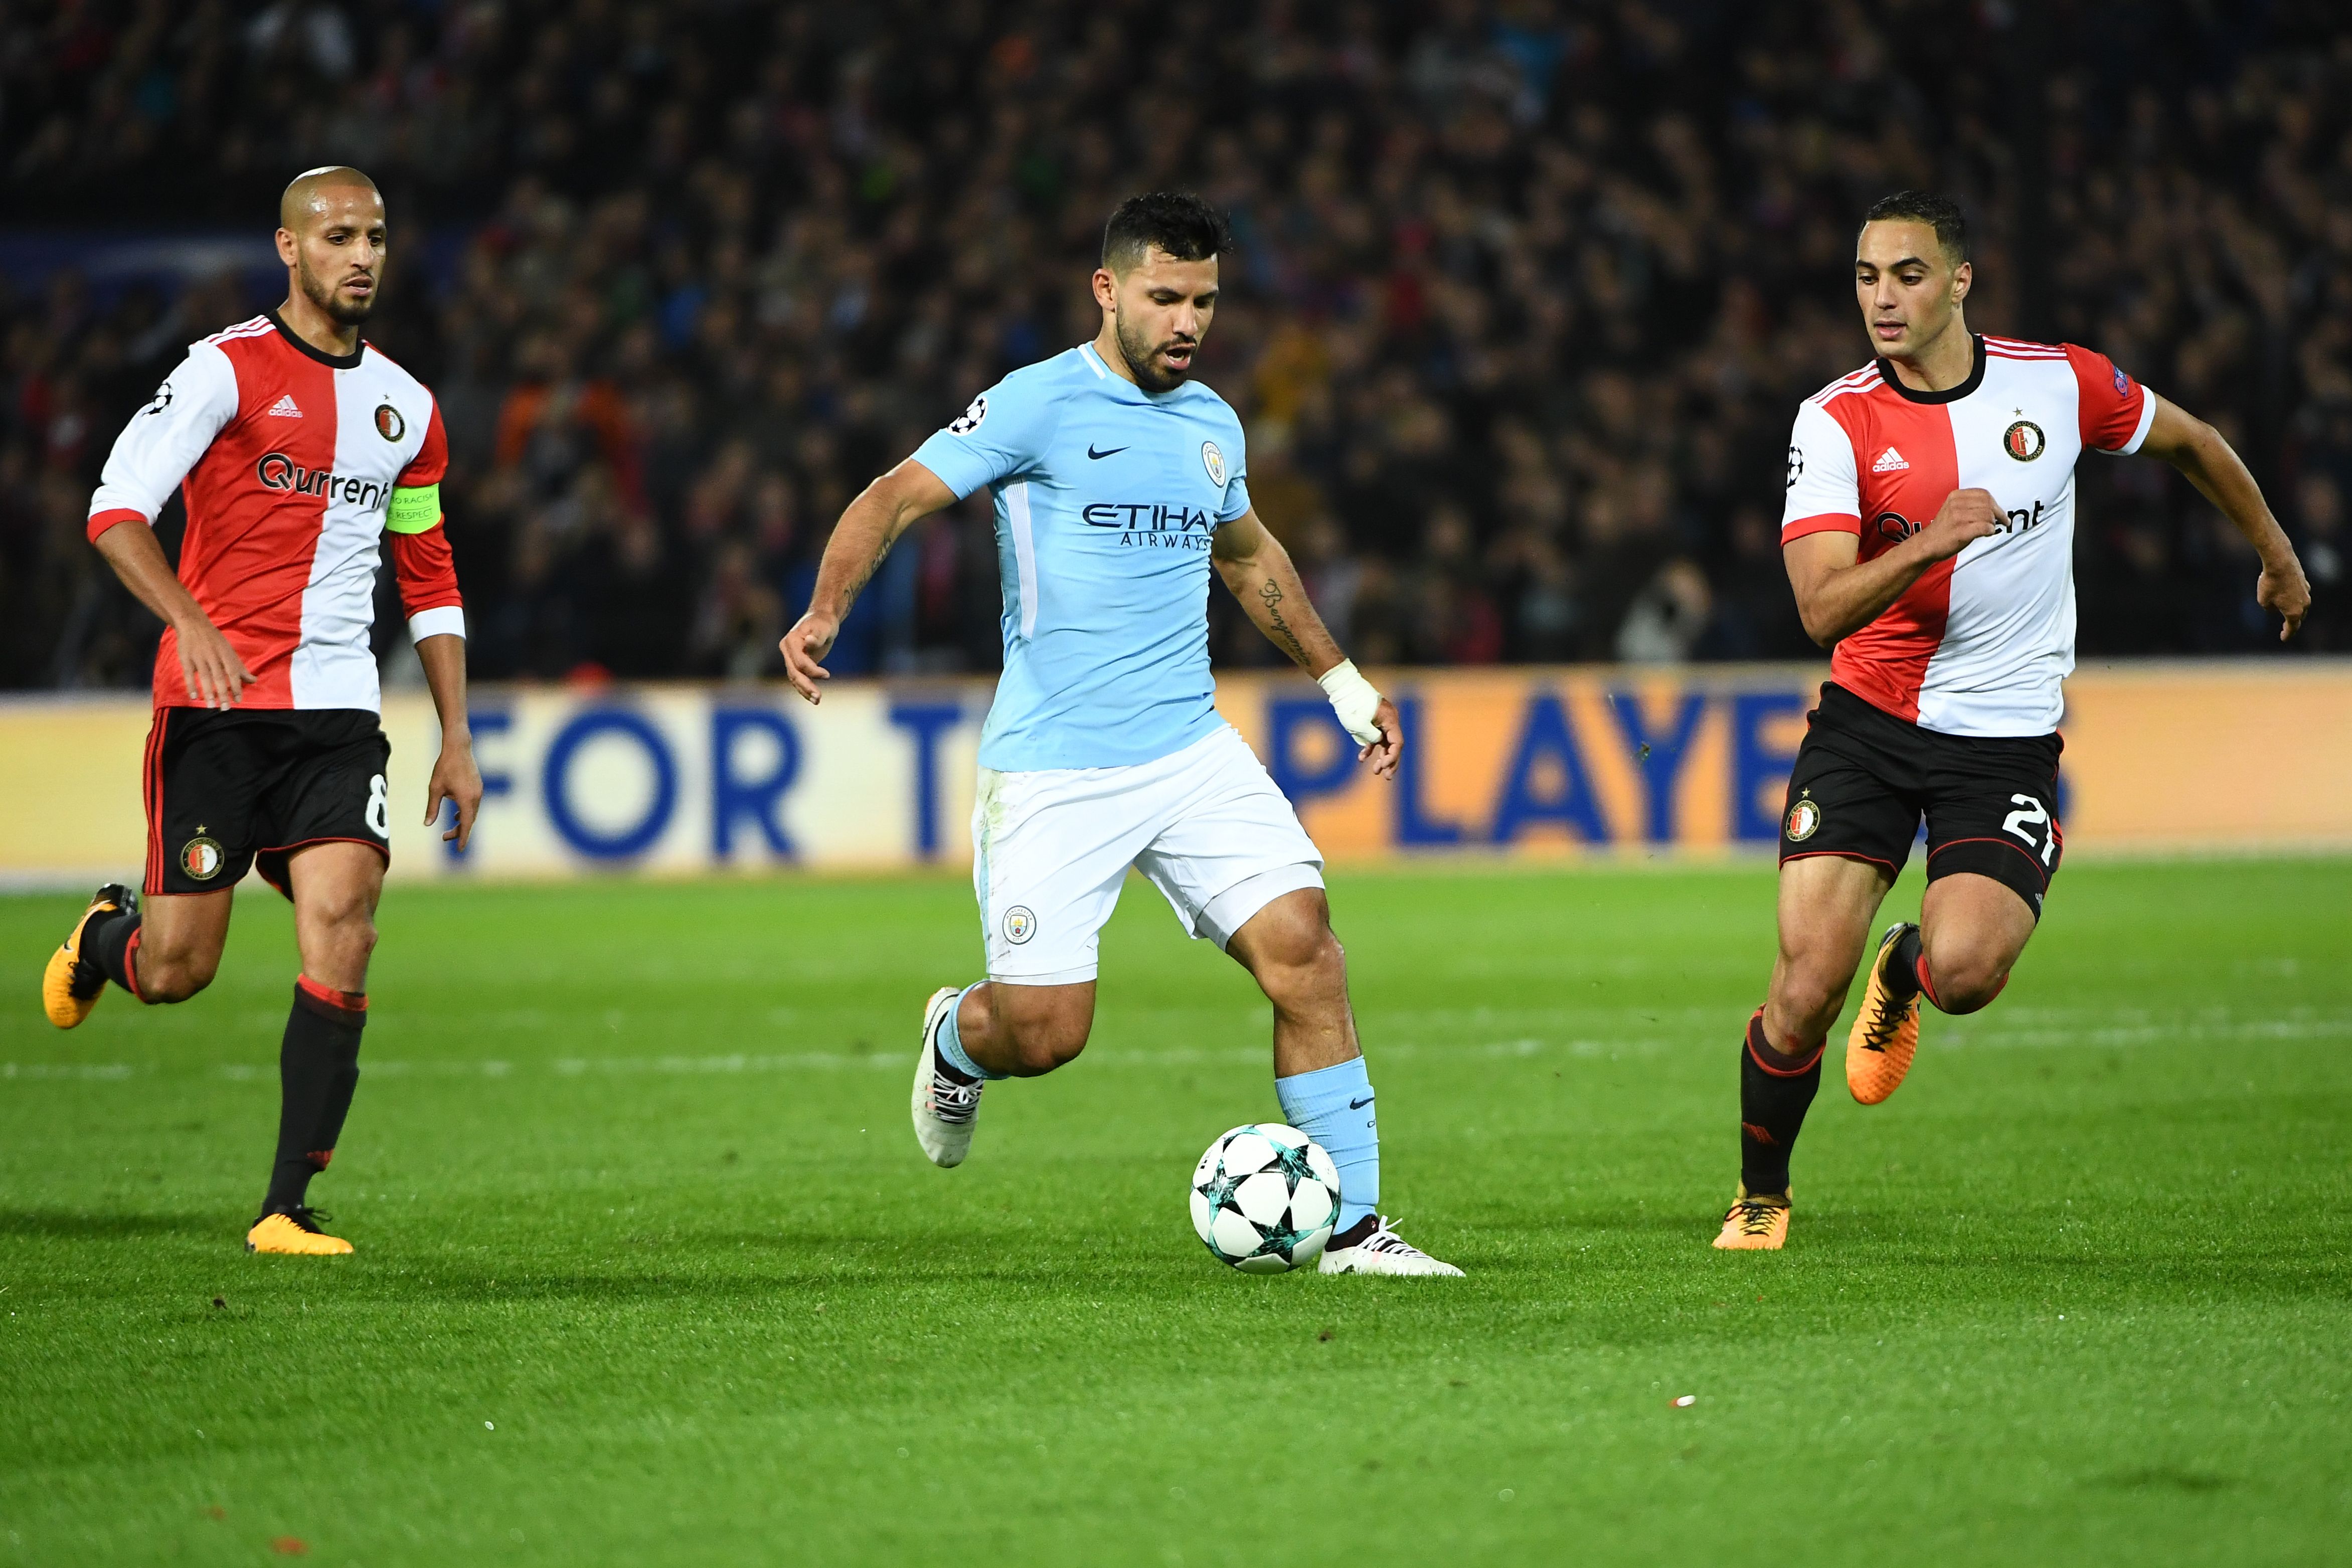 Manchester City's Argentinian striker Sergio Aguero (C) vies for the ball with Feyenoord's Moroccan midfielder Sofyan Amrabat (R)  during the UEFA Champions League Group F football match between Feyenoord Rotterdam and Manchester City at the Feyenoord Stadium in Rotterdam, on September 13, 2017. / AFP PHOTO / Emmanuel DUNAND        (Photo credit should read EMMANUEL DUNAND/AFP/Getty Images)